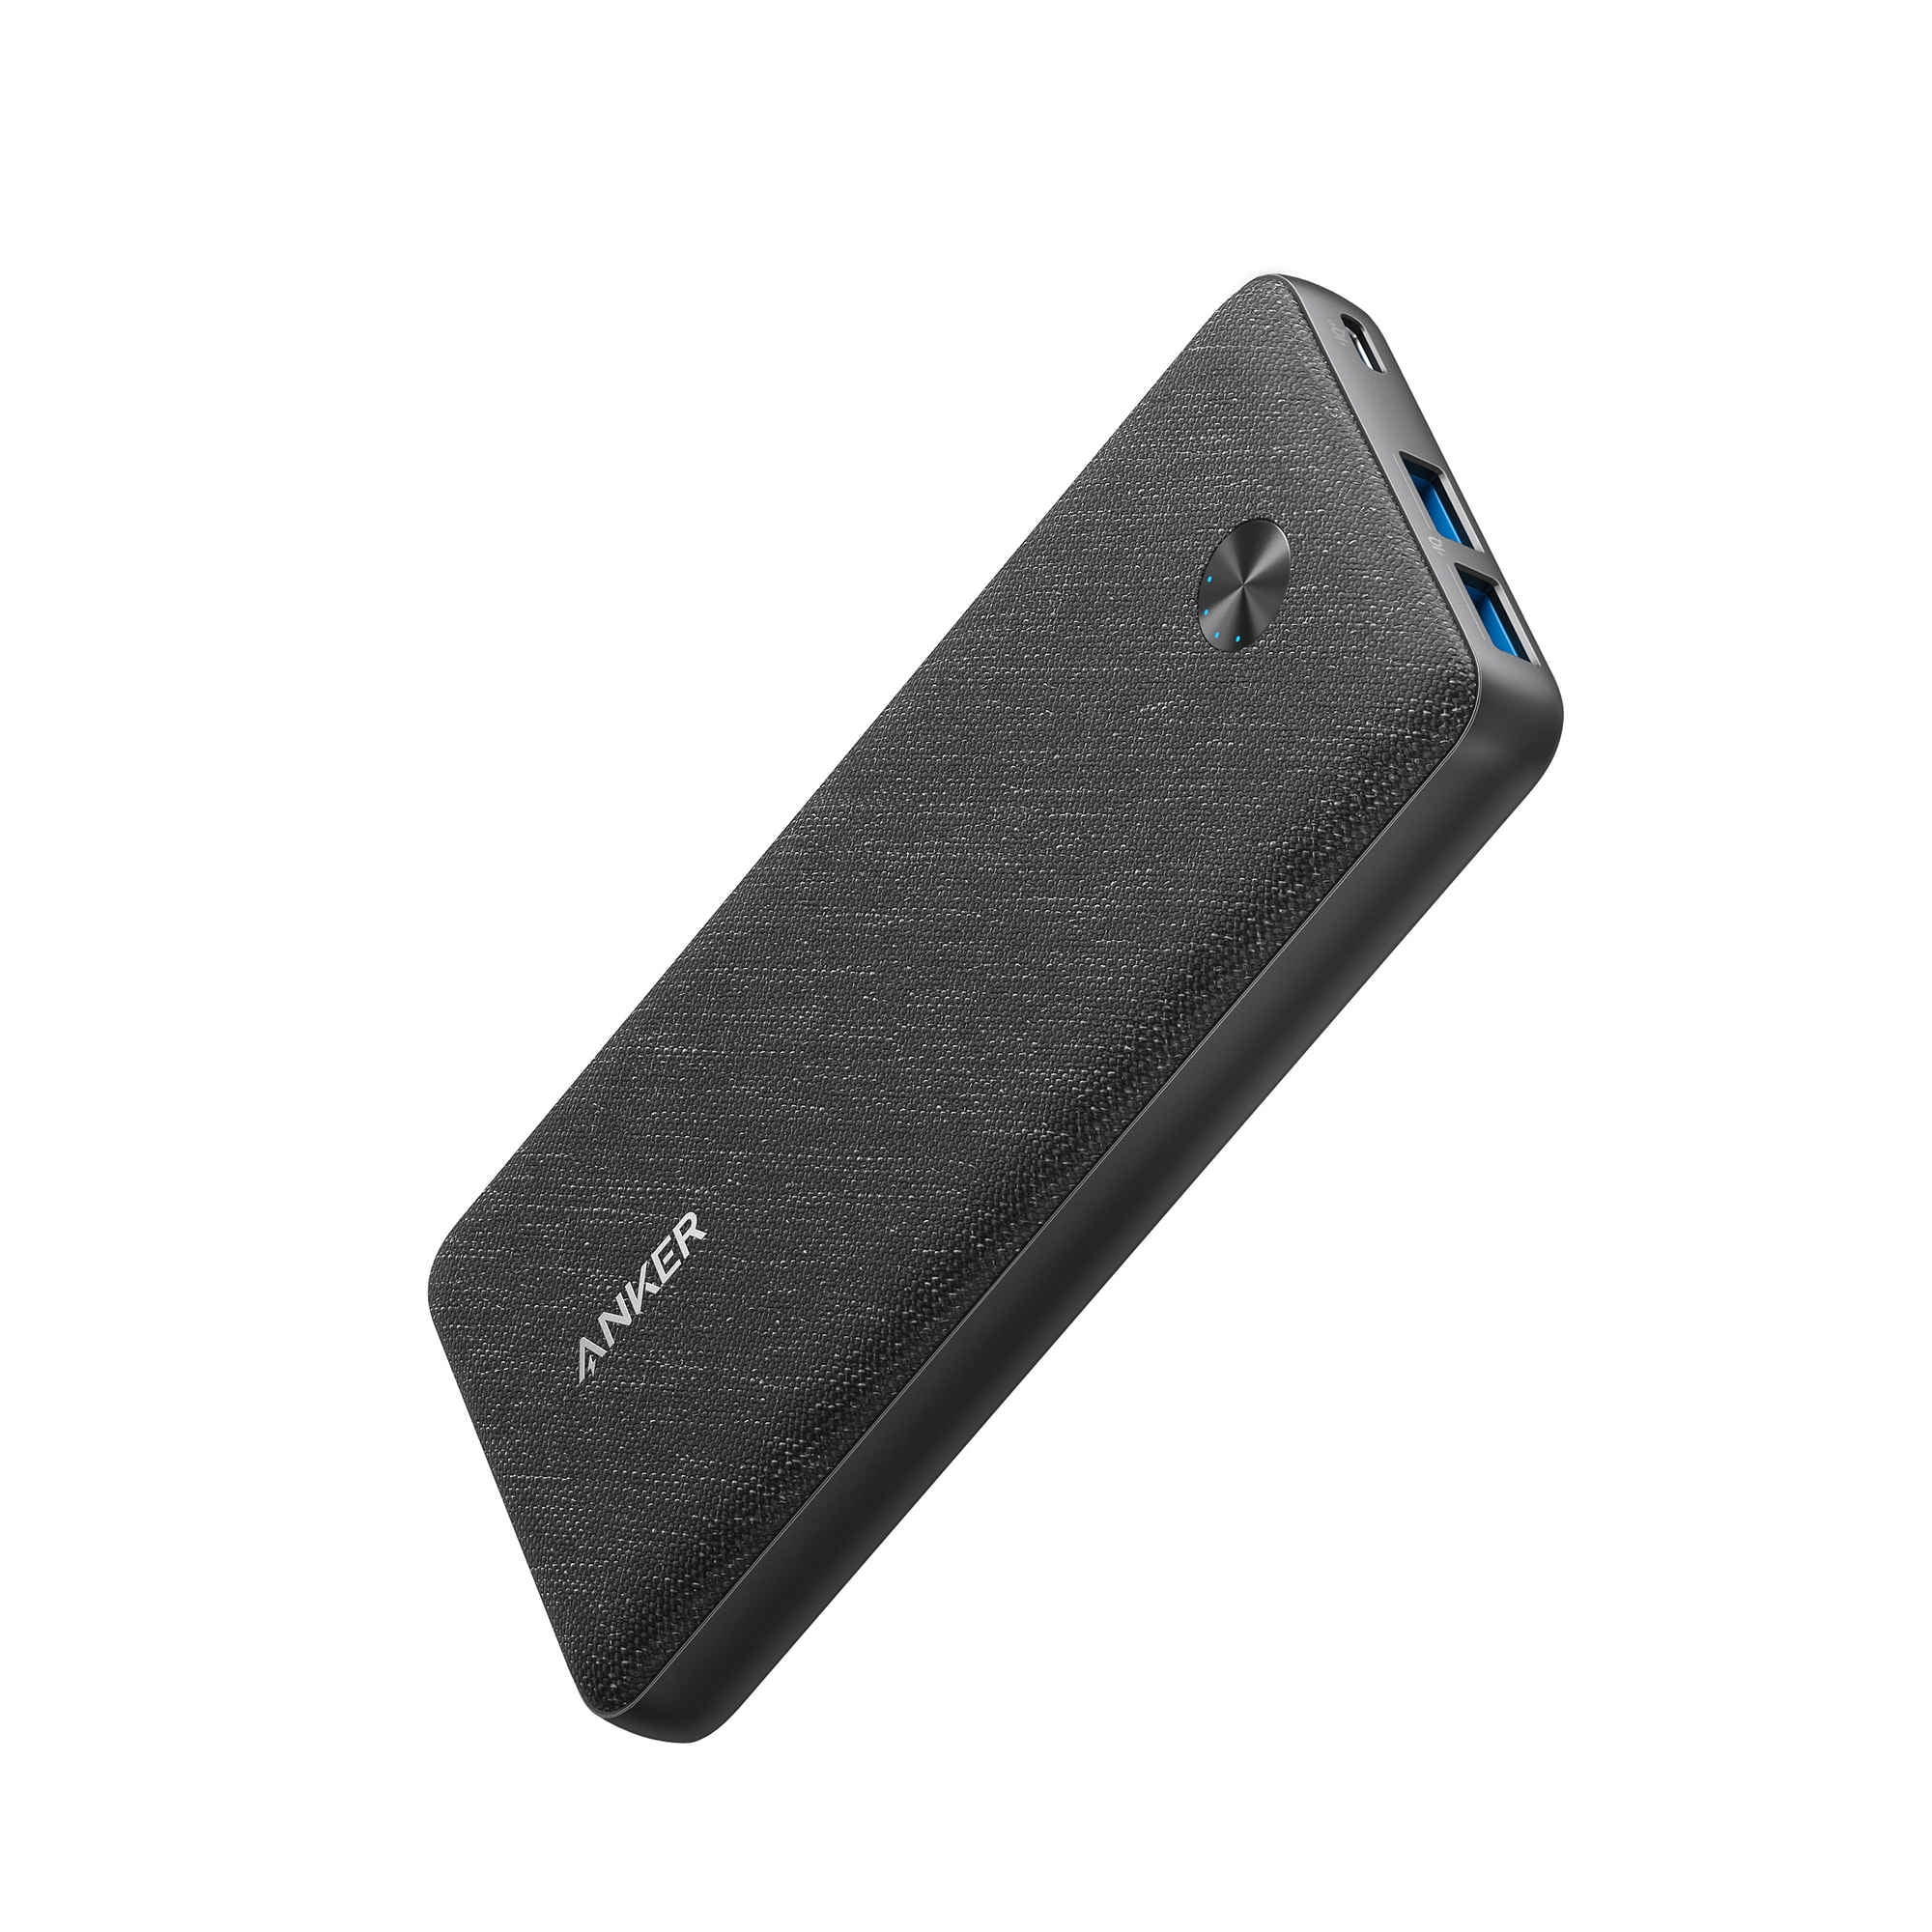 Anker Prime Power Bank 20000mAh 200W USB-C Portable Charger 3-Ports Battery  Pack